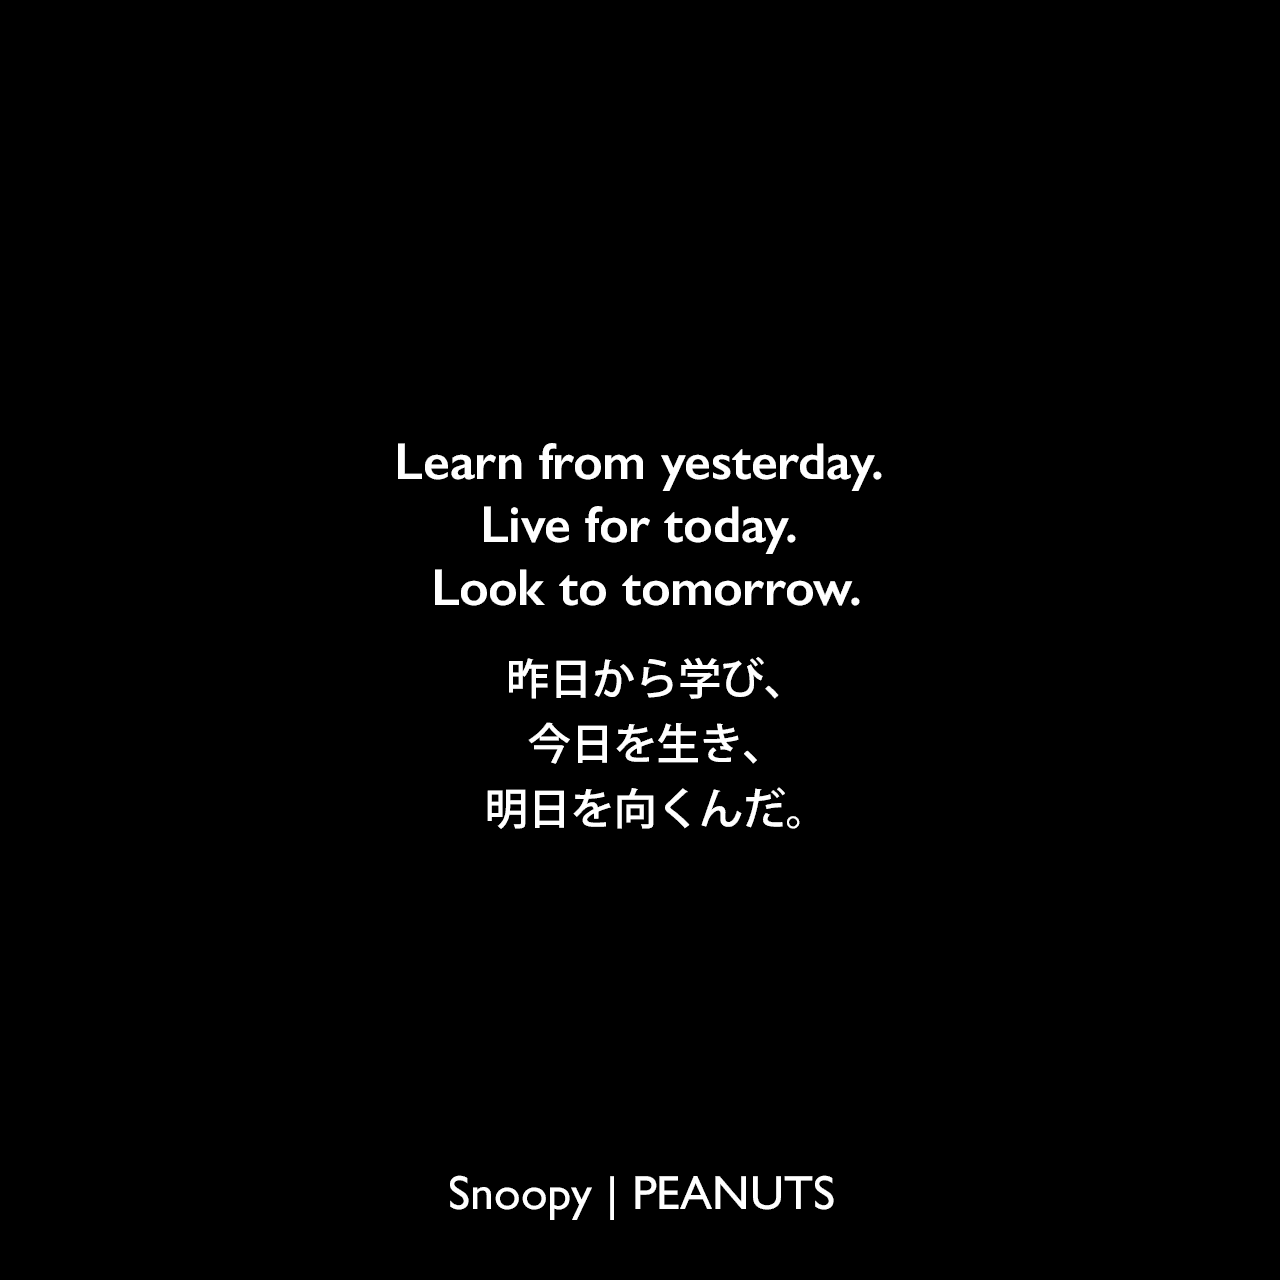 Learn from yesterday. Live for today. Look to tomorrow.昨日から学び、今日を生き、明日を向くんだ。Charles Monroe Schulz